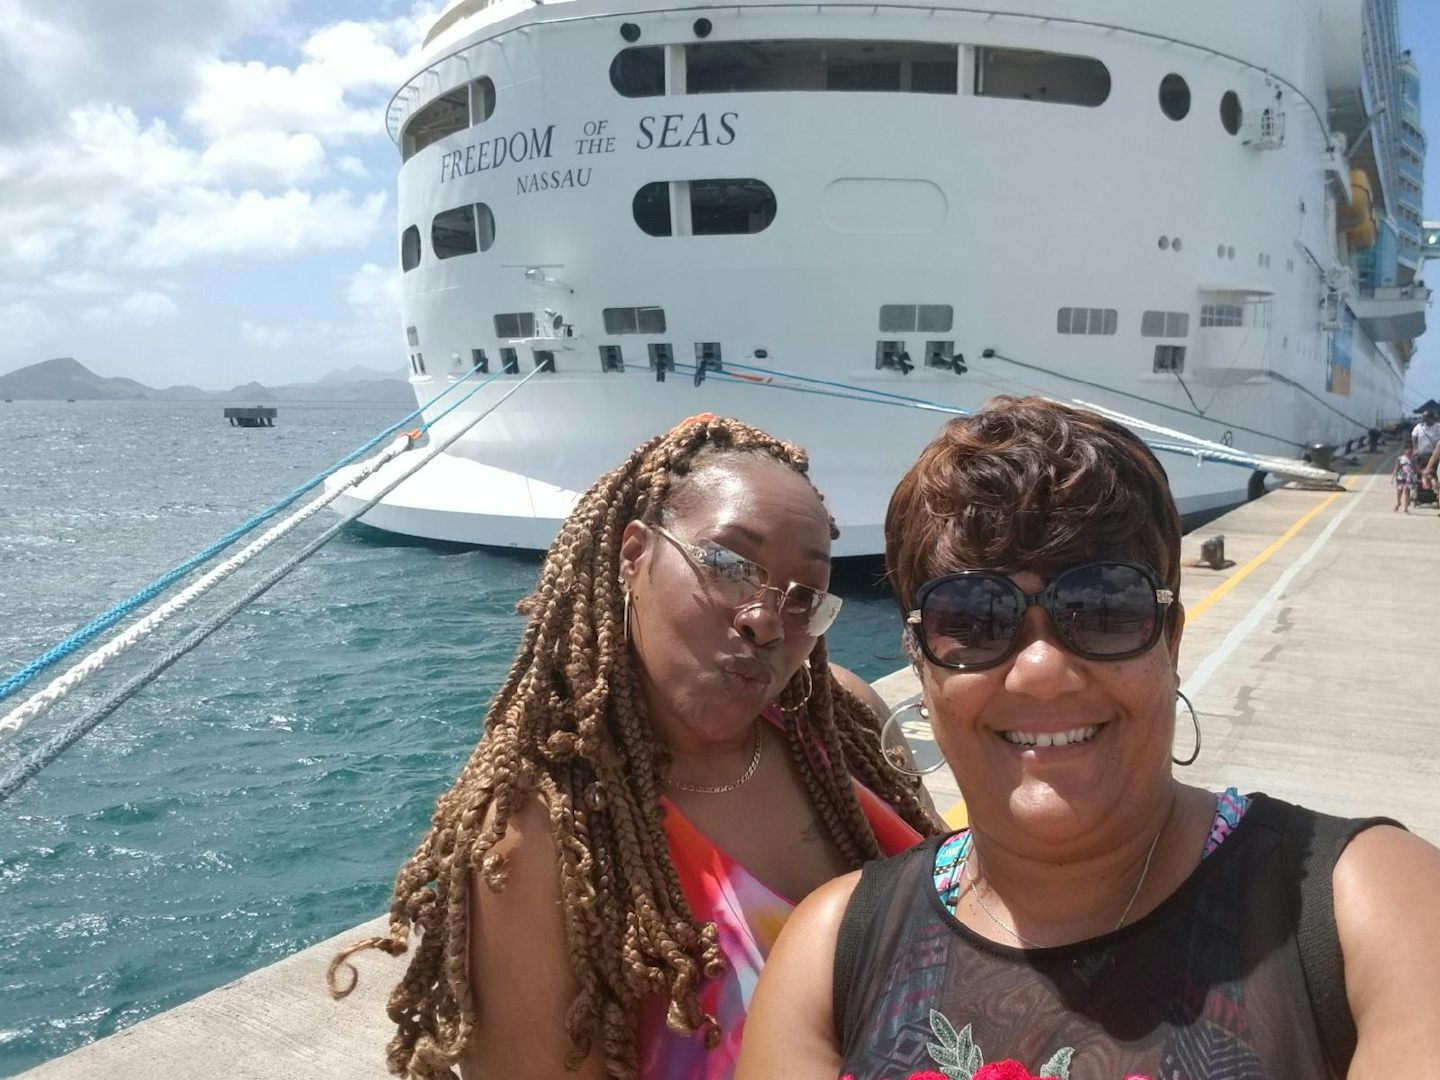 We at our first port, St. Kitts! Showing our ship. About to enjoy the water